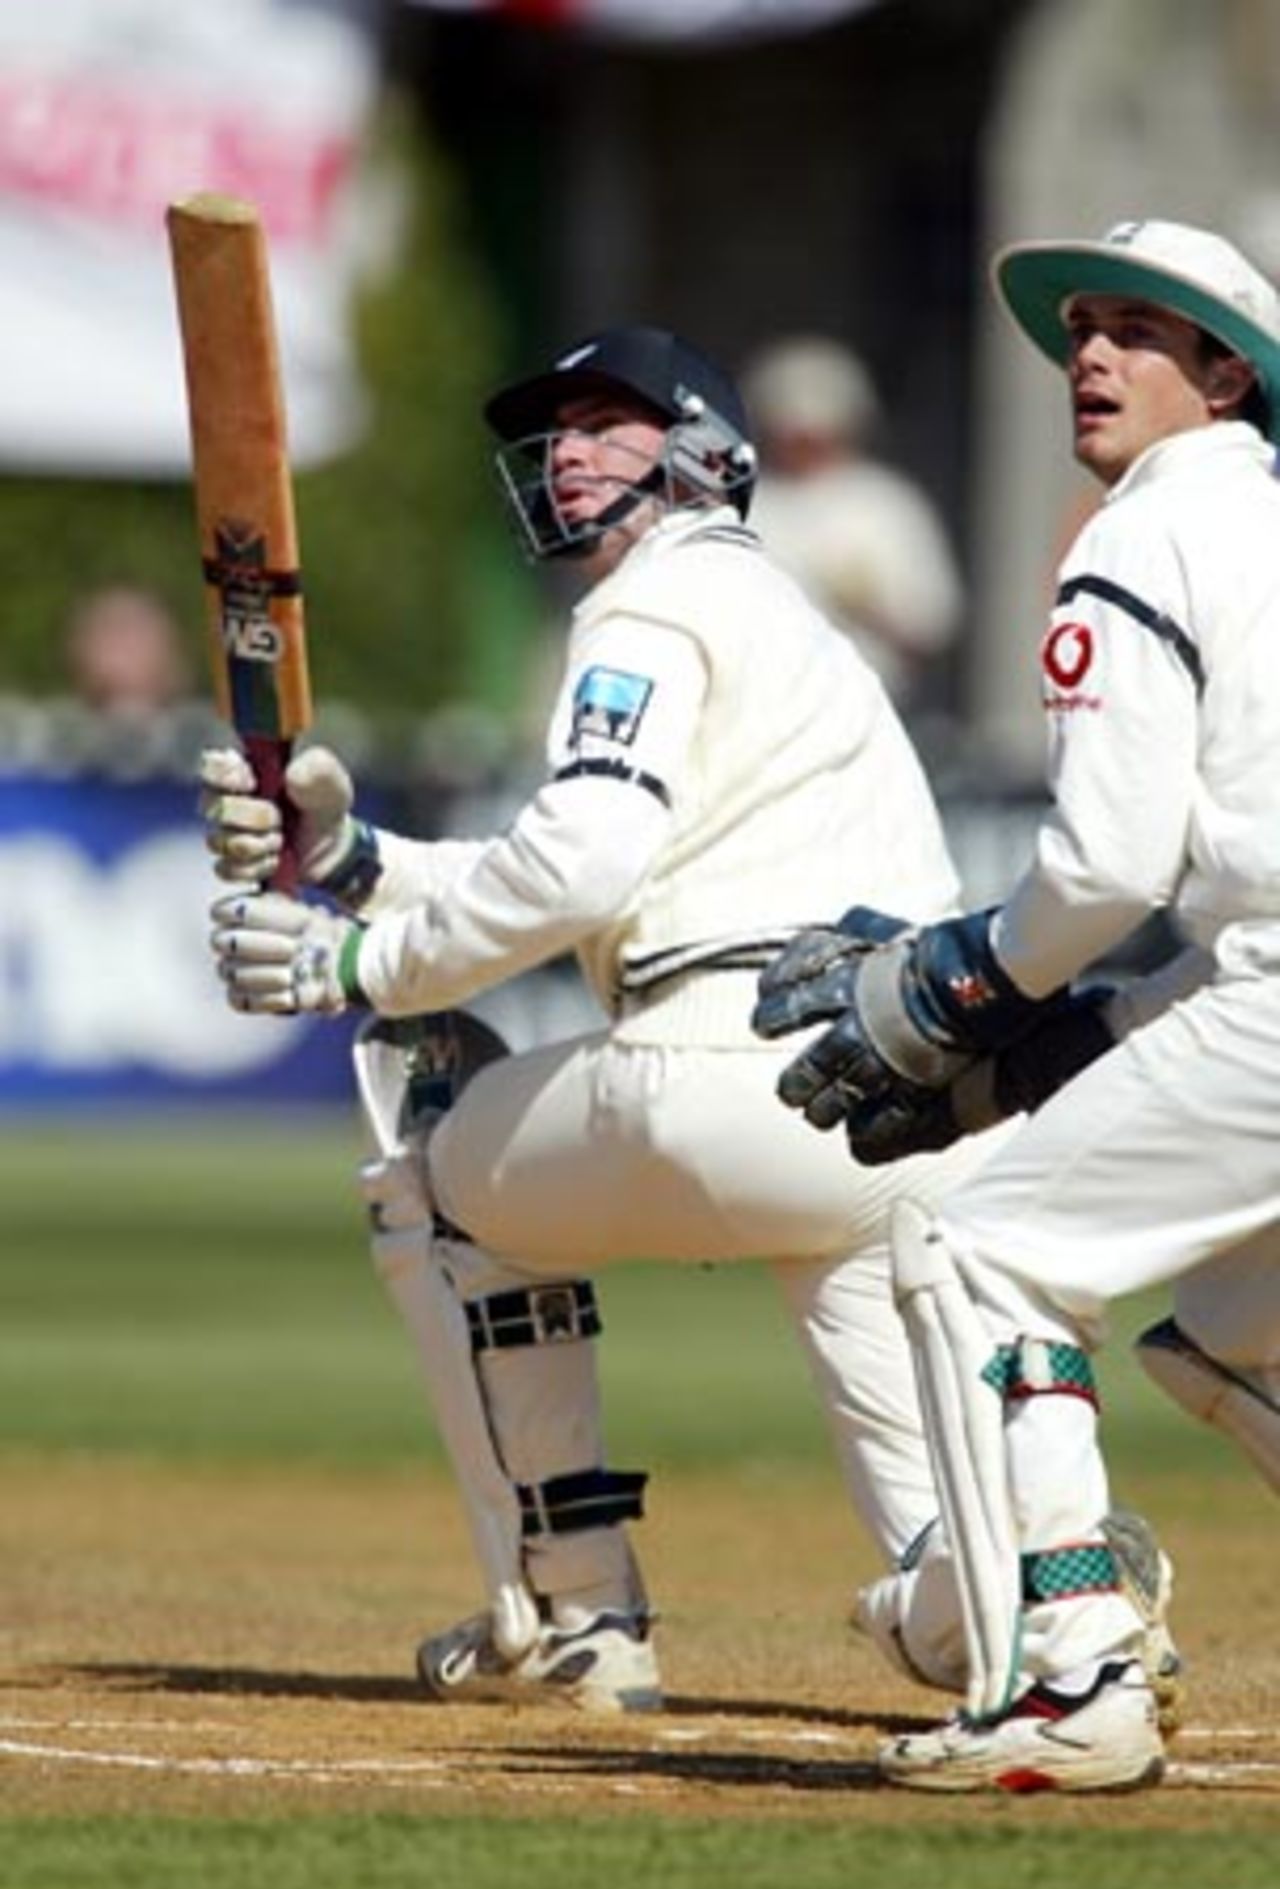 New Zealand batsman Matt Horne sweeps a delivery from England bowler Ashley Giles as wicket-keeper James Foster looks on. Horne scored 38 in his second innings. 2nd Test: New Zealand v England at Basin Reserve, Wellington, 21-25 March 2002 (25 March 2002).